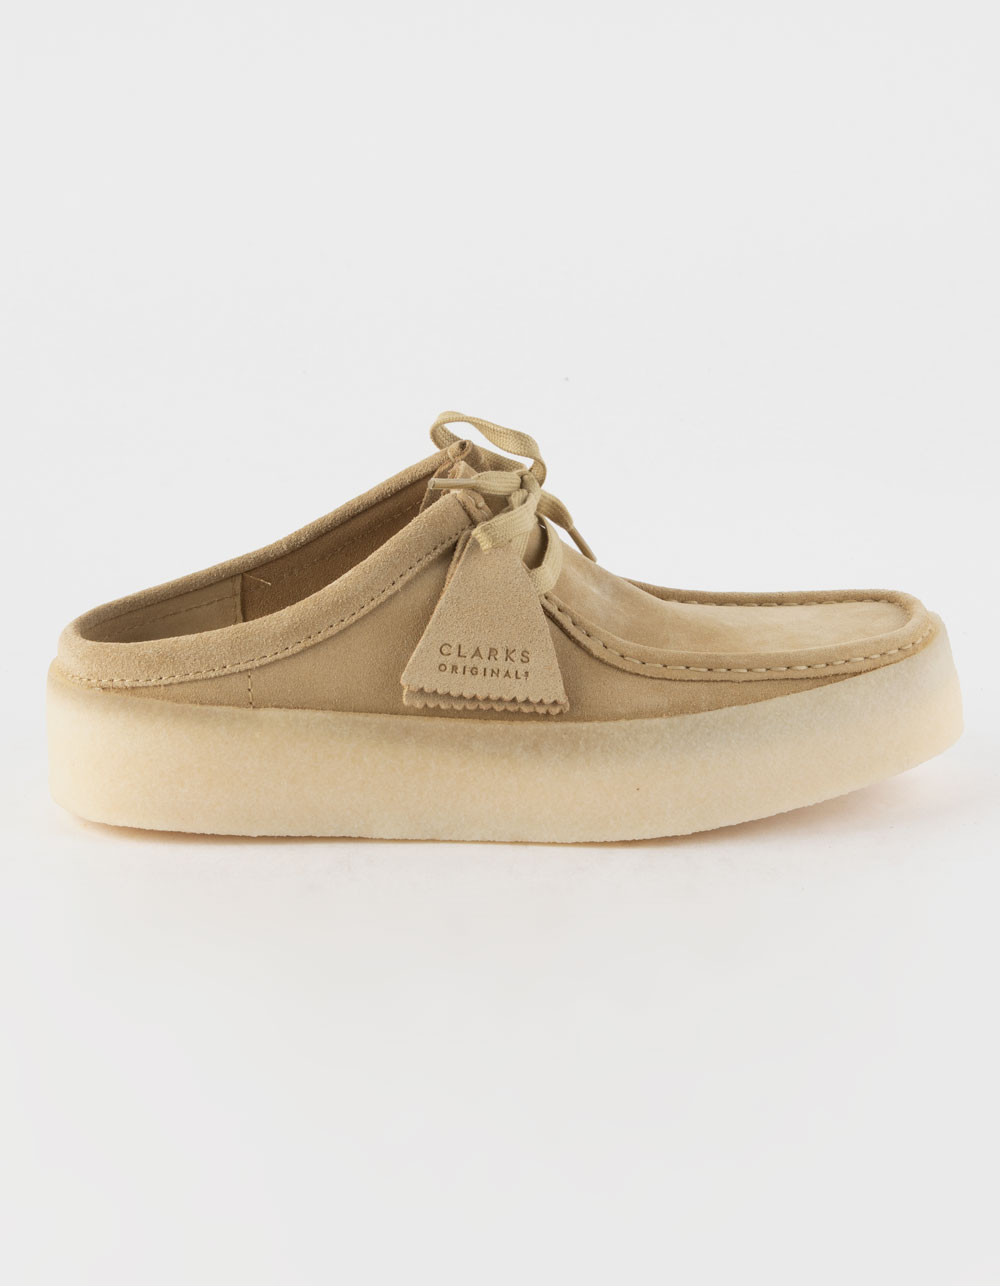 CLARKS Wallabee Cup Lo Mens Shoes - TAN | Tillys